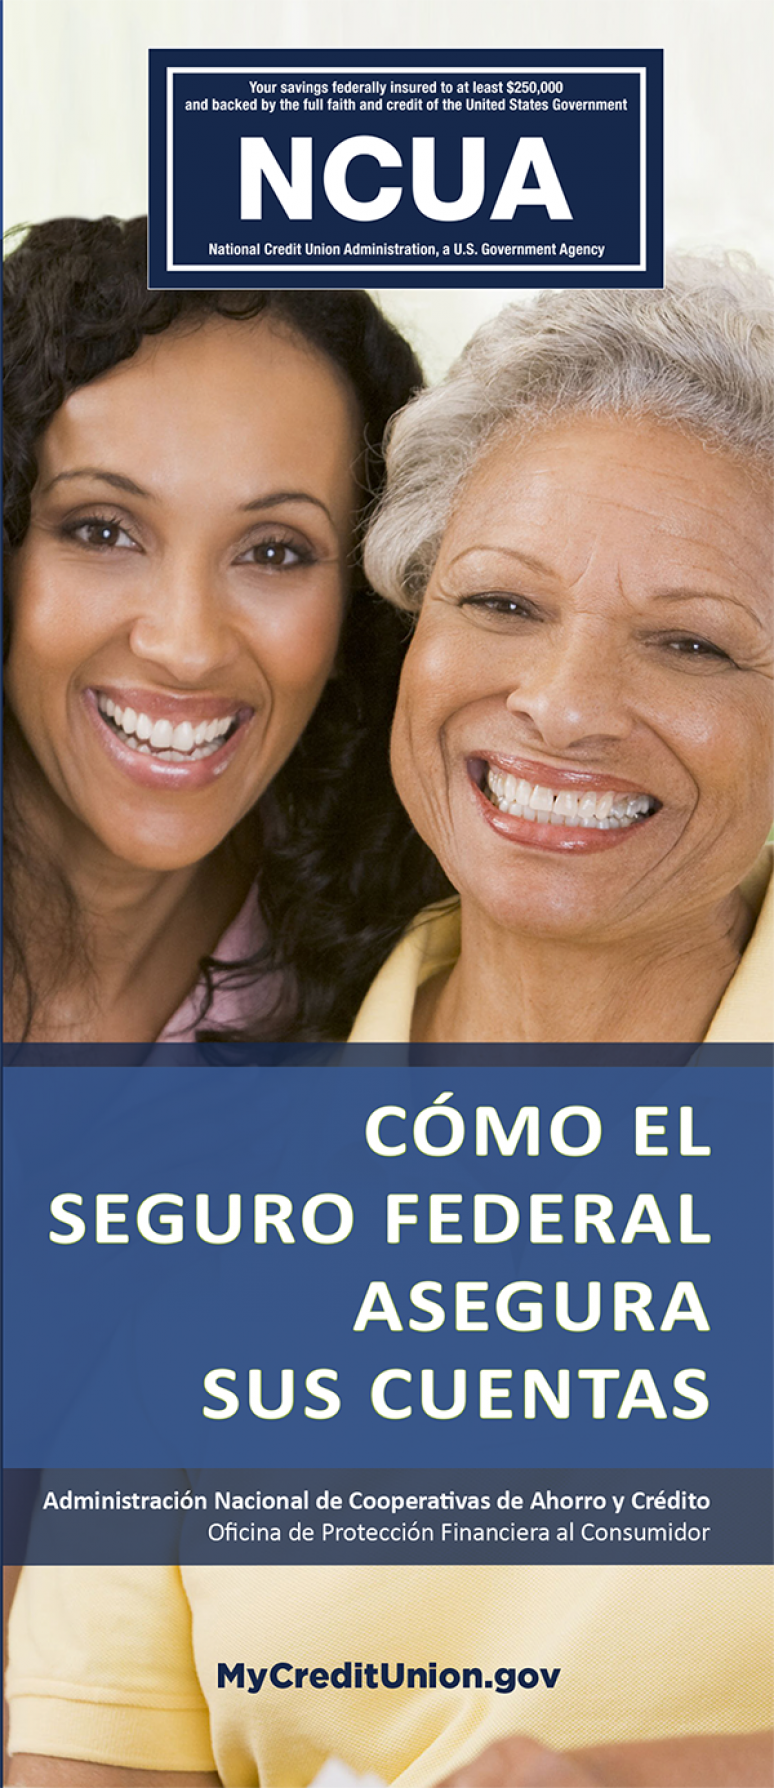 How Your Accounts Are Federally Insured (Spanish)